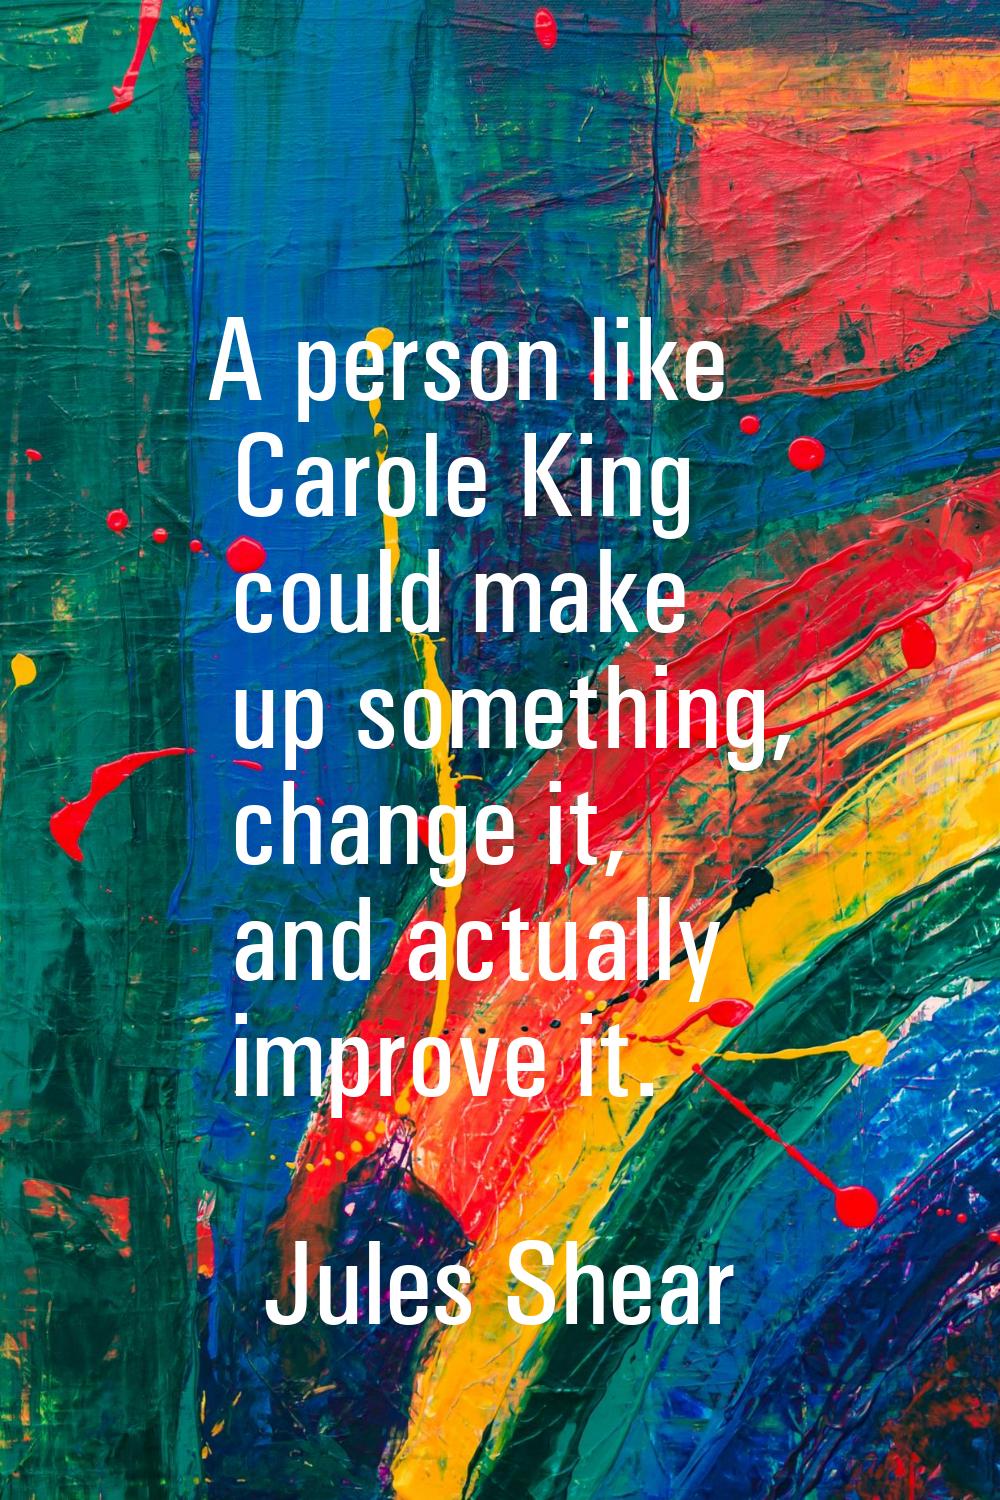 A person like Carole King could make up something, change it, and actually improve it.